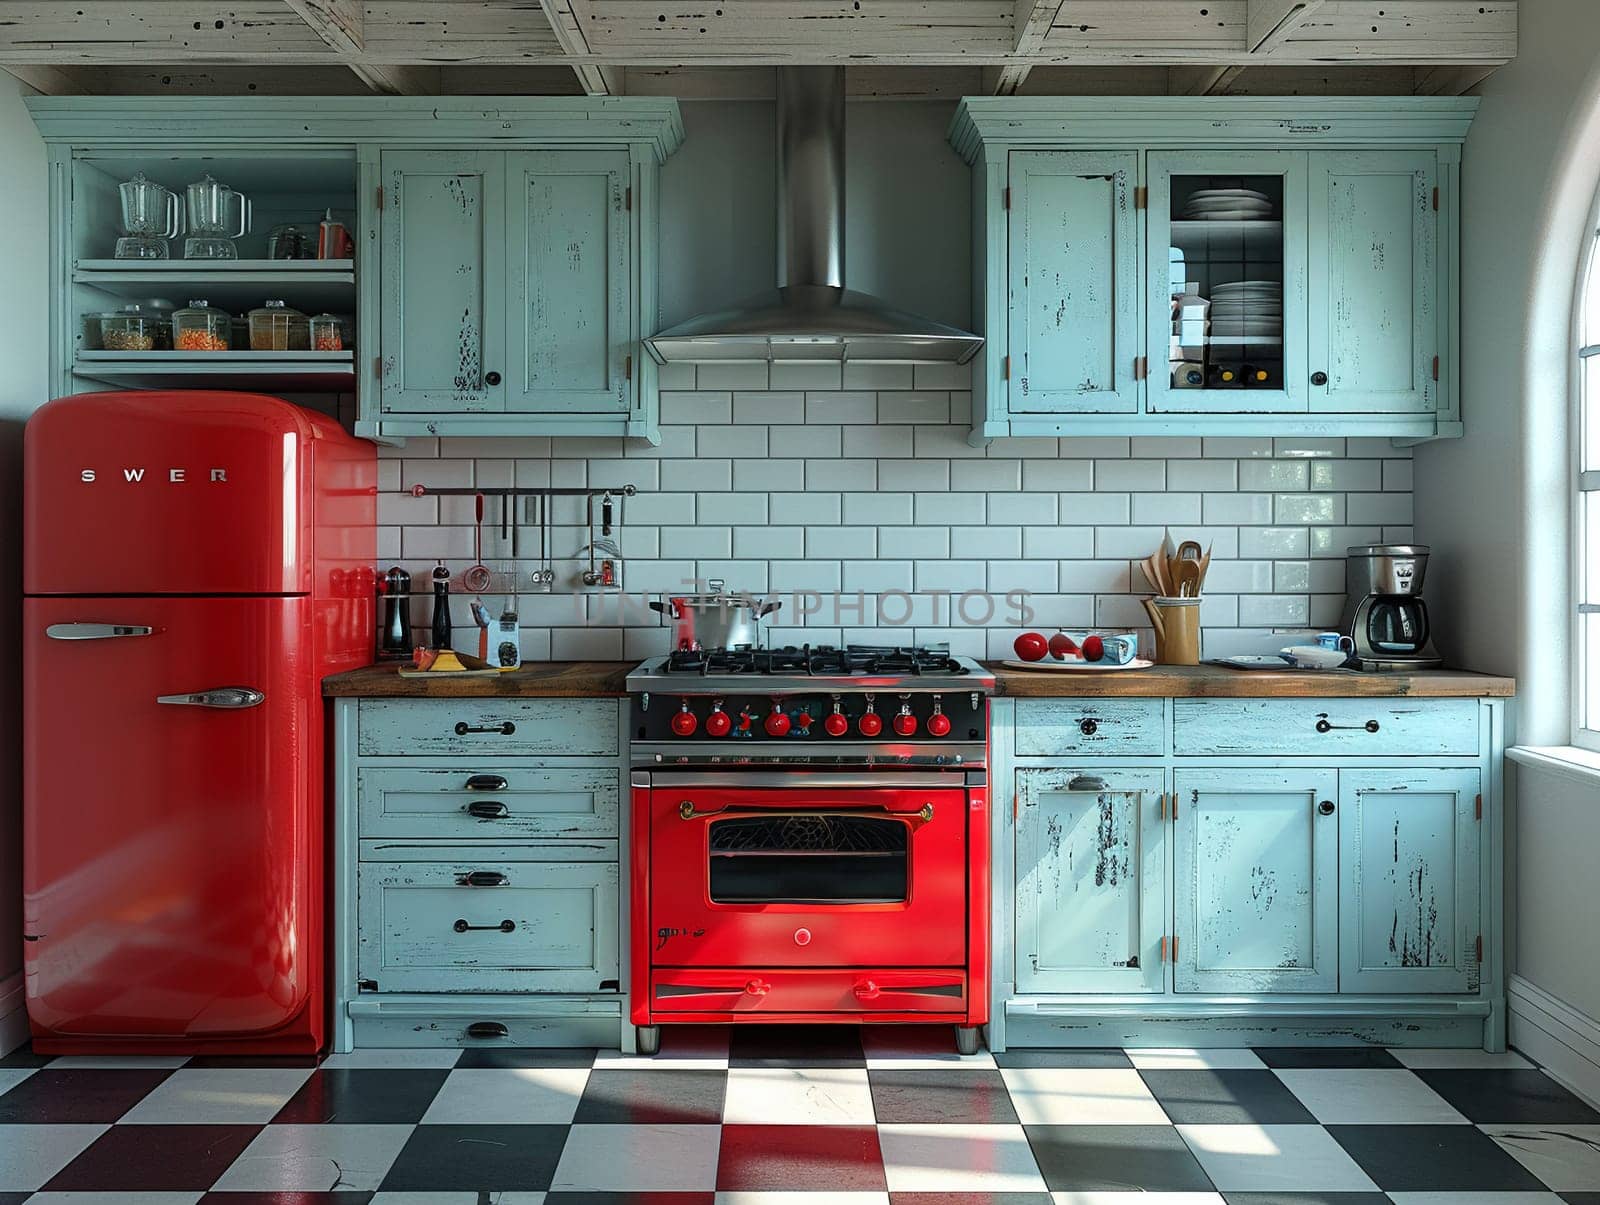 Vintage diner-inspired kitchen with checkered floors and retro appliances8K by Benzoix